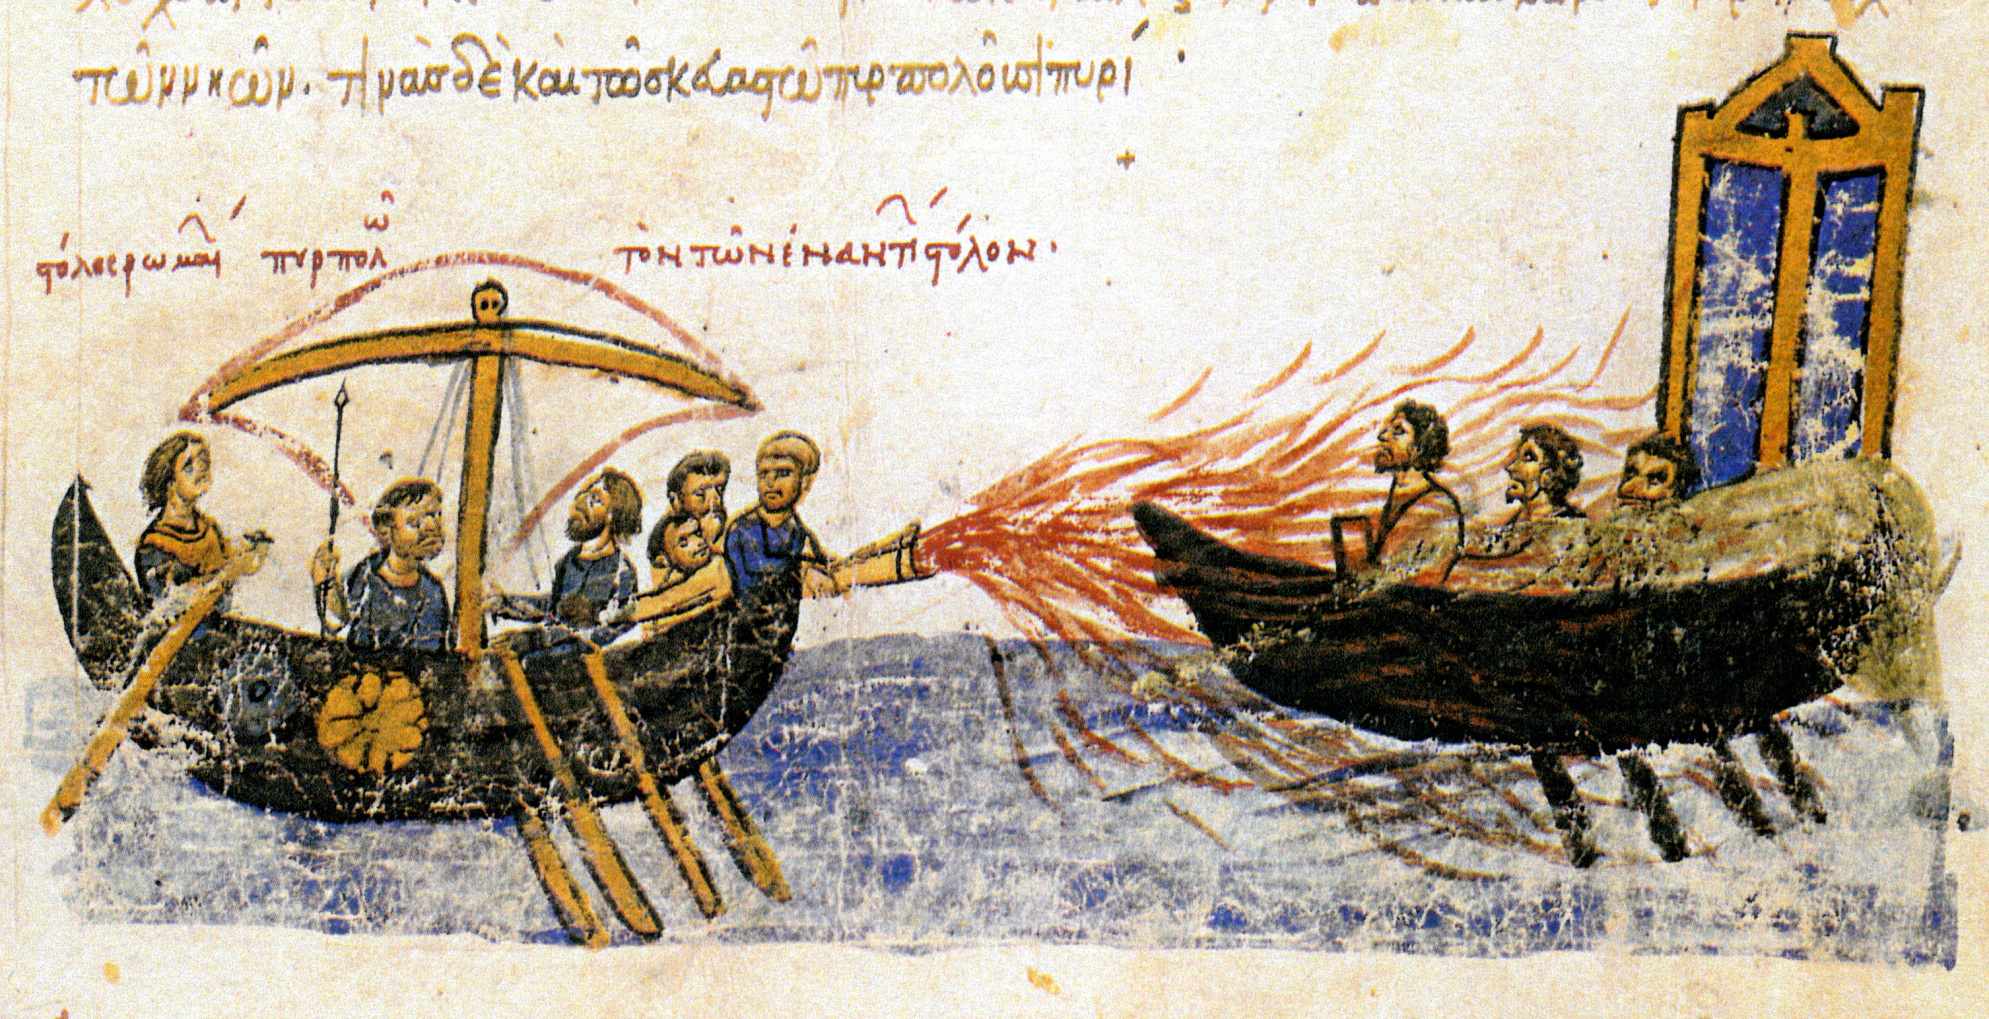 "The Roman fleet burn the opposite fleet down" – A Byzantine ship using Greek fire against a ship belonging to the rebel Thomas the Slav, 821. 12th century illustration from the Madrid Skylitzes.